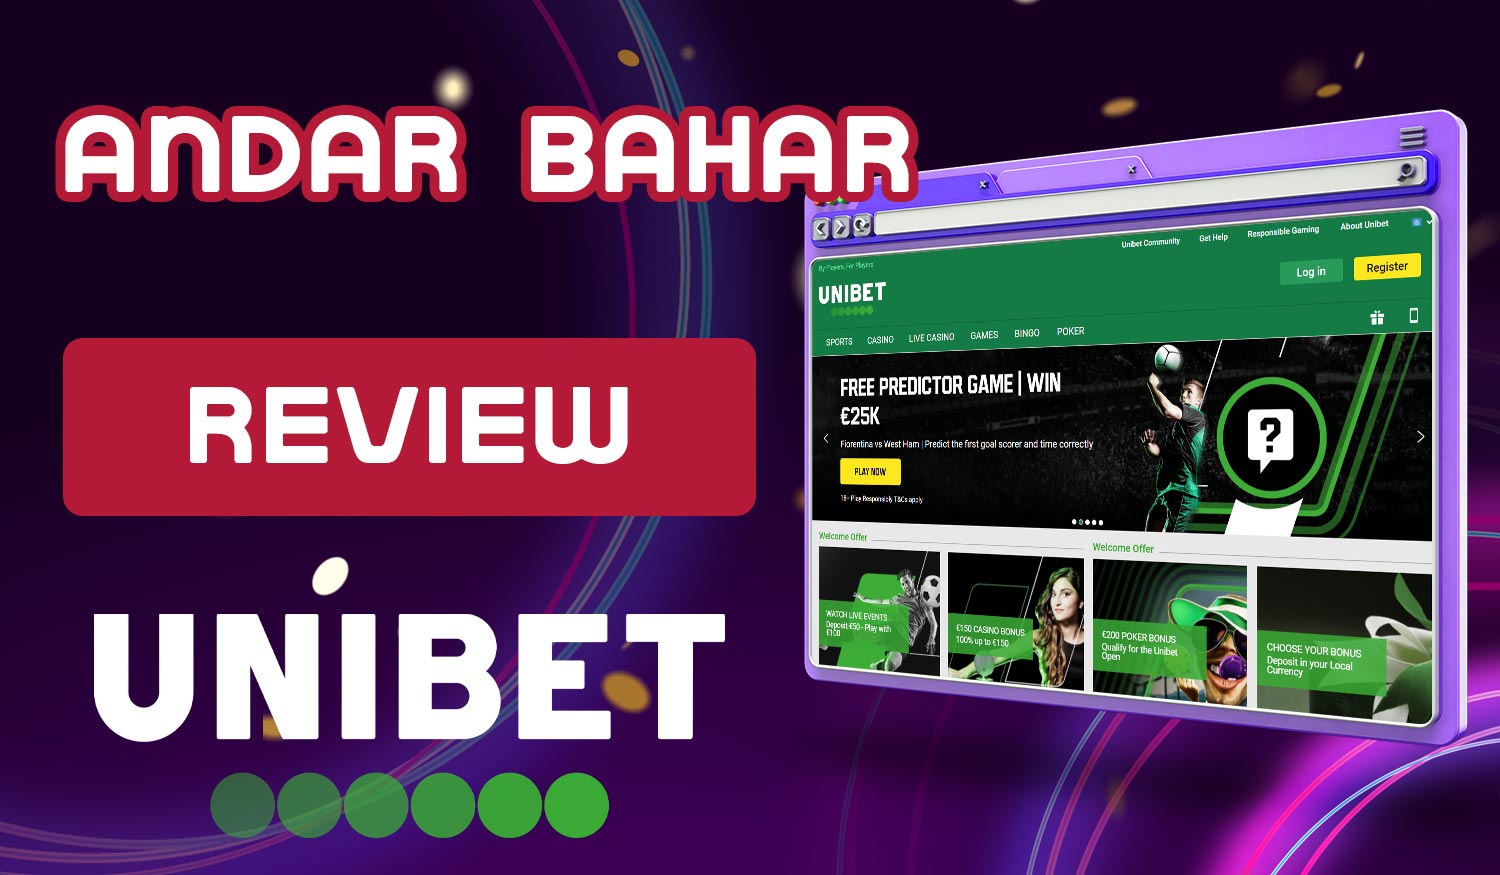 Detailed review of the Unibet India bookmaker on Andar Bahars